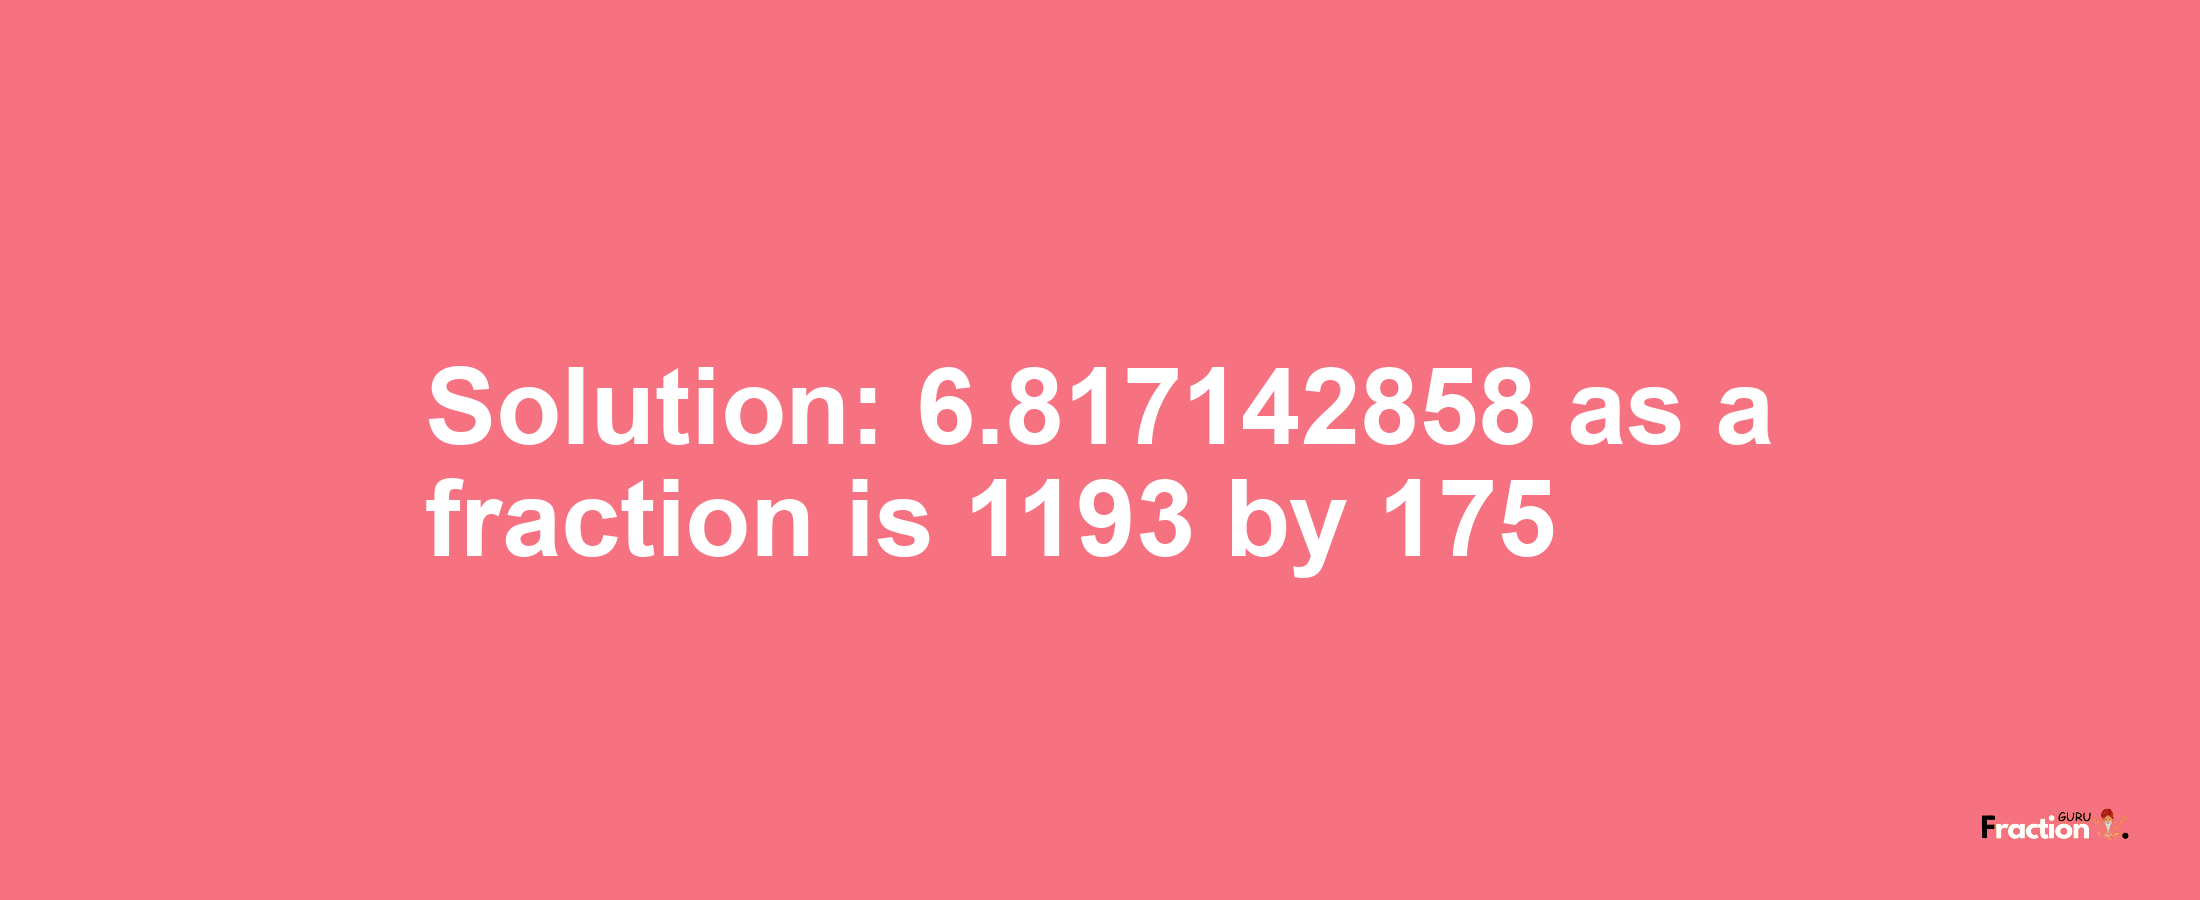 Solution:6.817142858 as a fraction is 1193/175